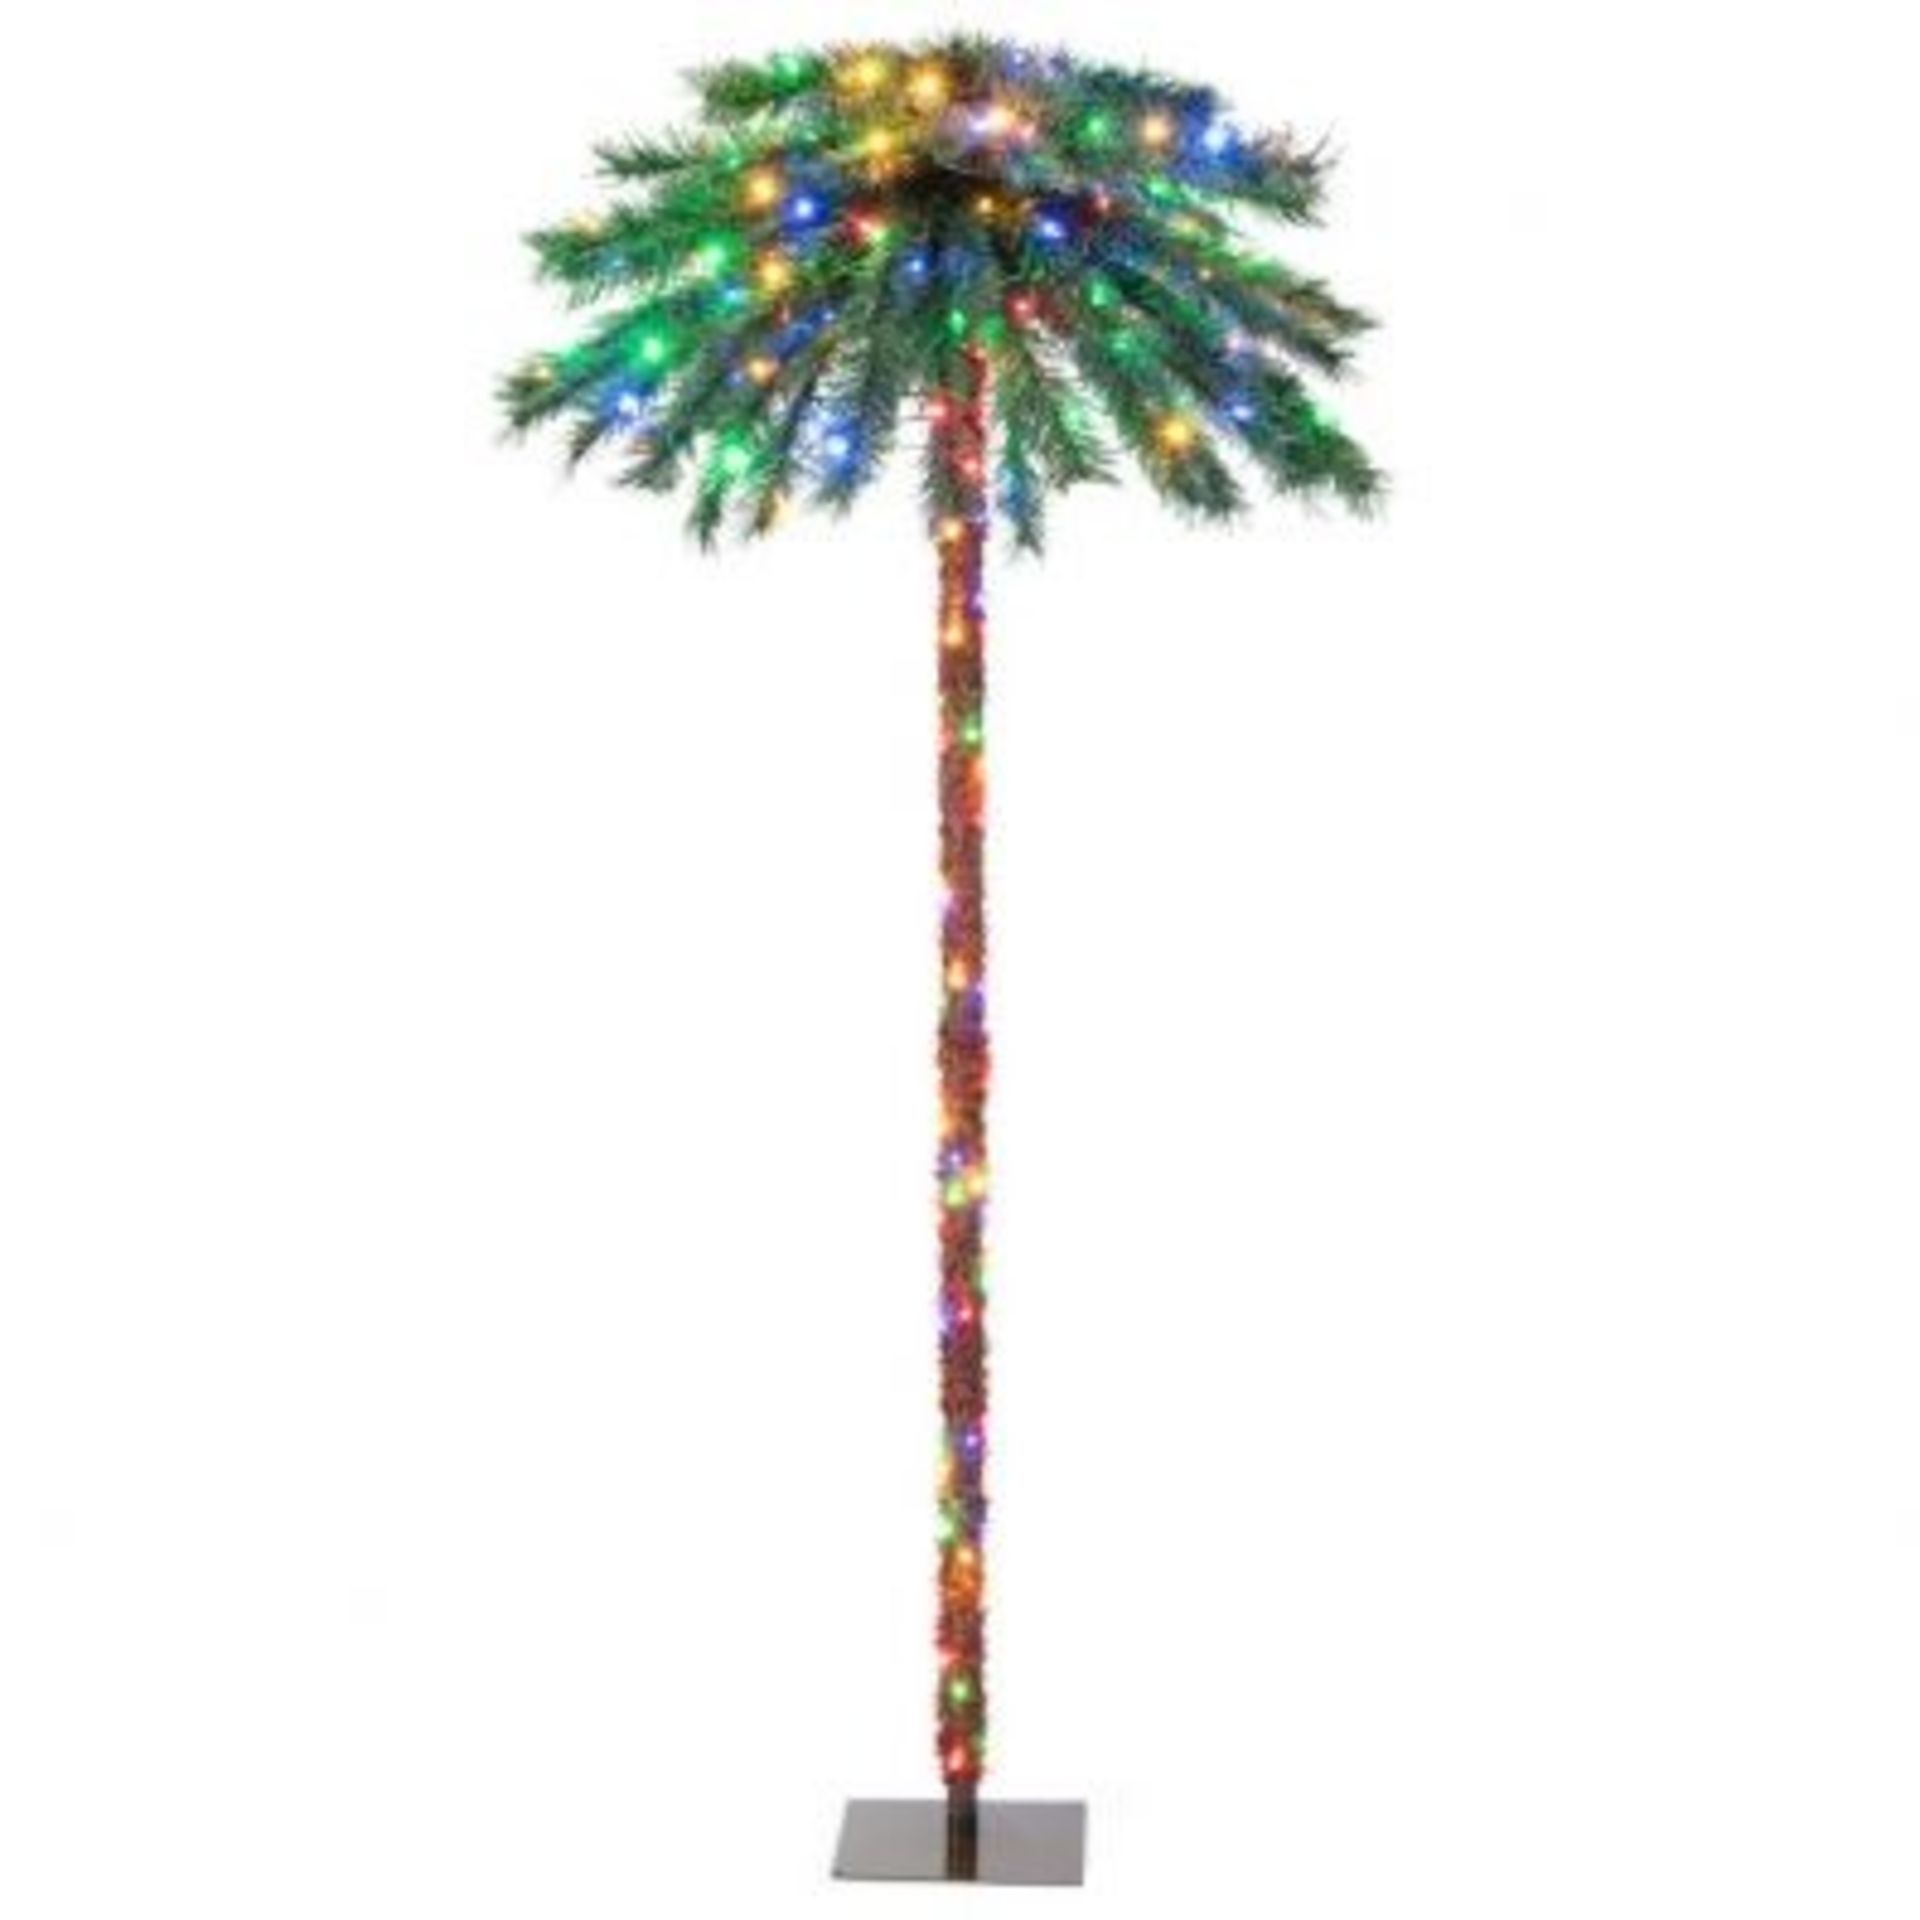 6 Feet Pre-Lit Artificial Christmas Palm Tree with LED Lights - ER54